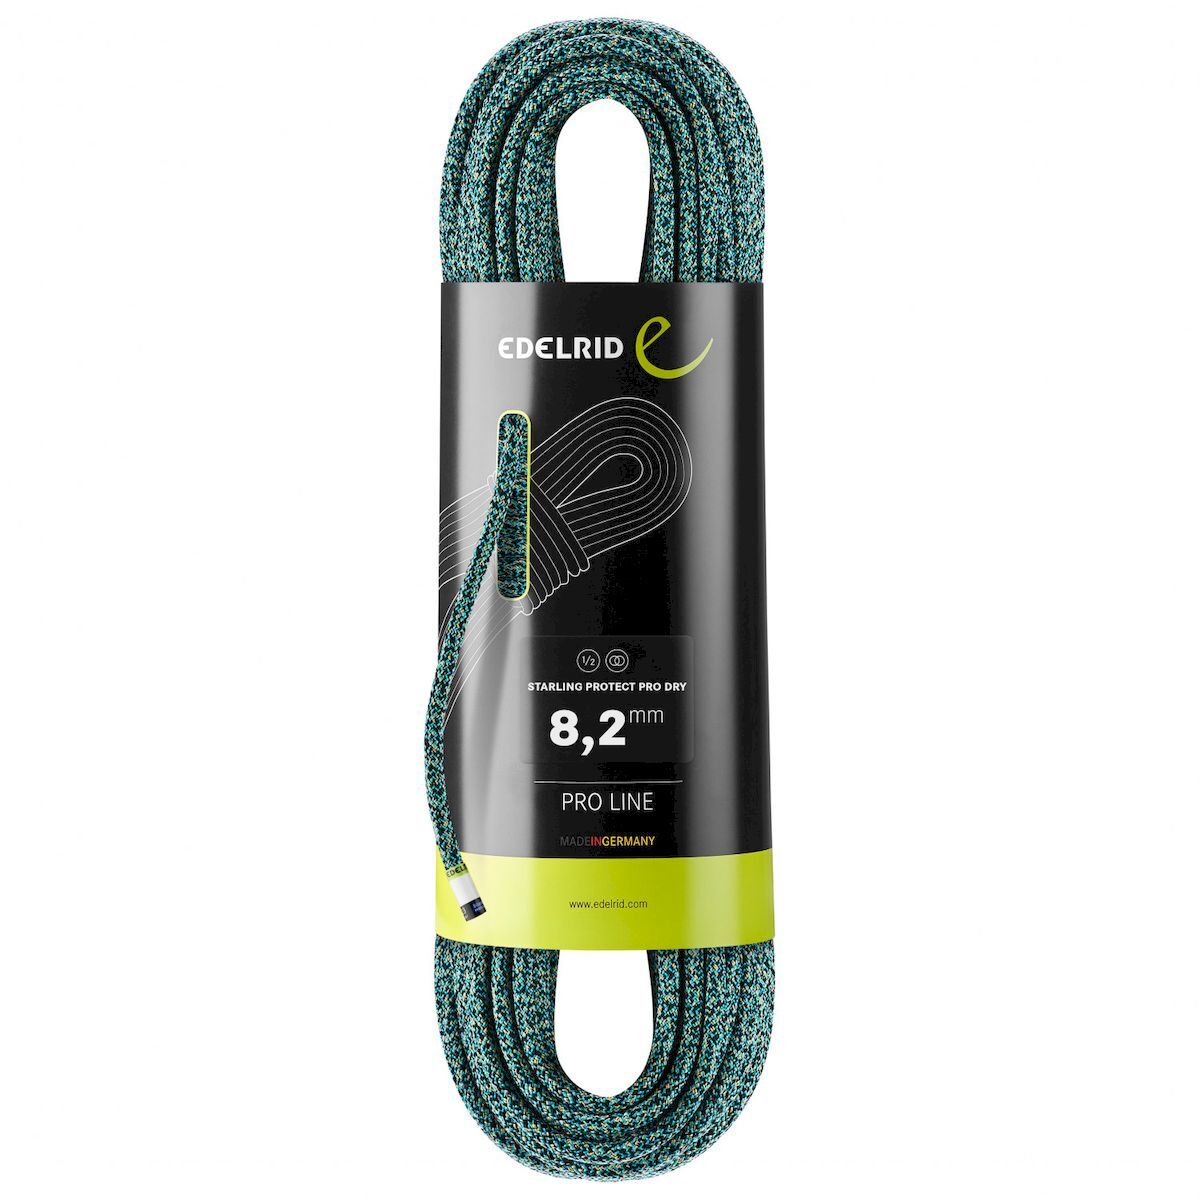 Edelrid Starling Protect Pro Dry 8,2 mm - Halvrep